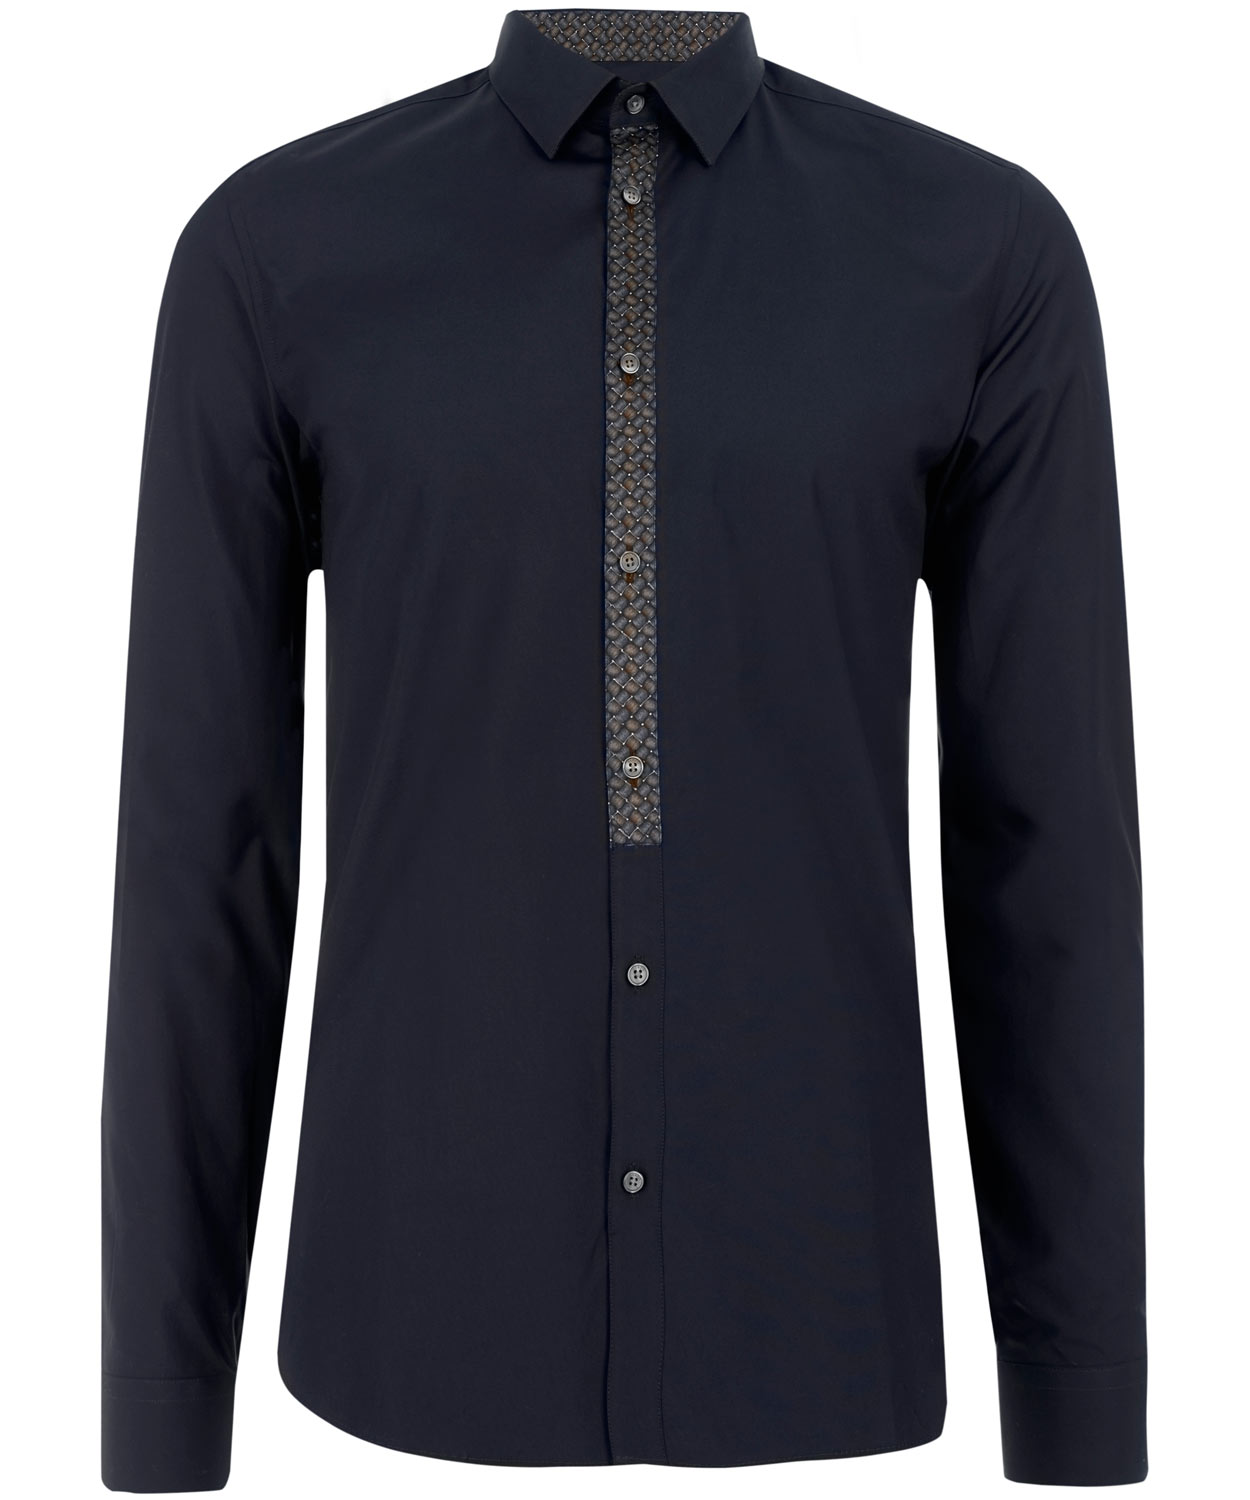 Lyst - Kenzo Navy Contrast Placket Shirt in Blue for Men